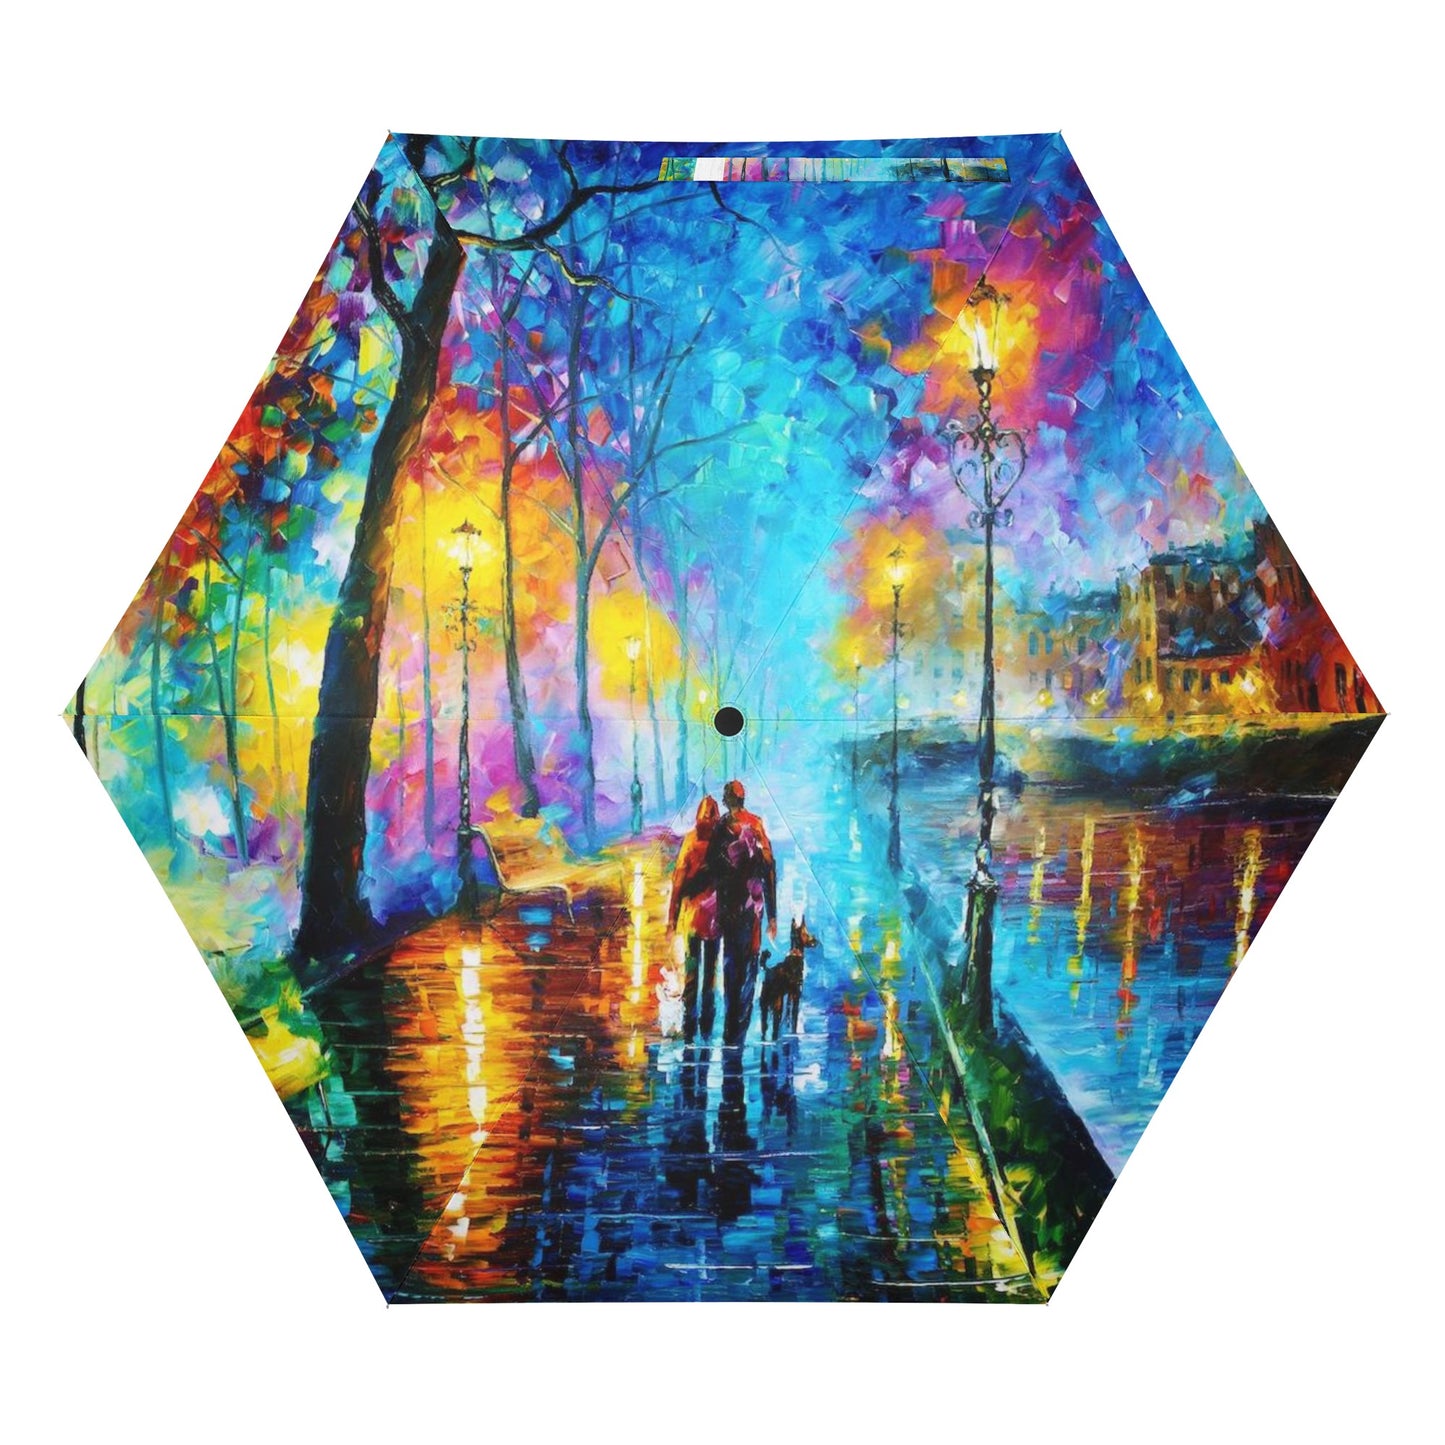 Fully Auto Open & Close Umbrella Printing Outside Afremov MELODY OF THE NIGHT